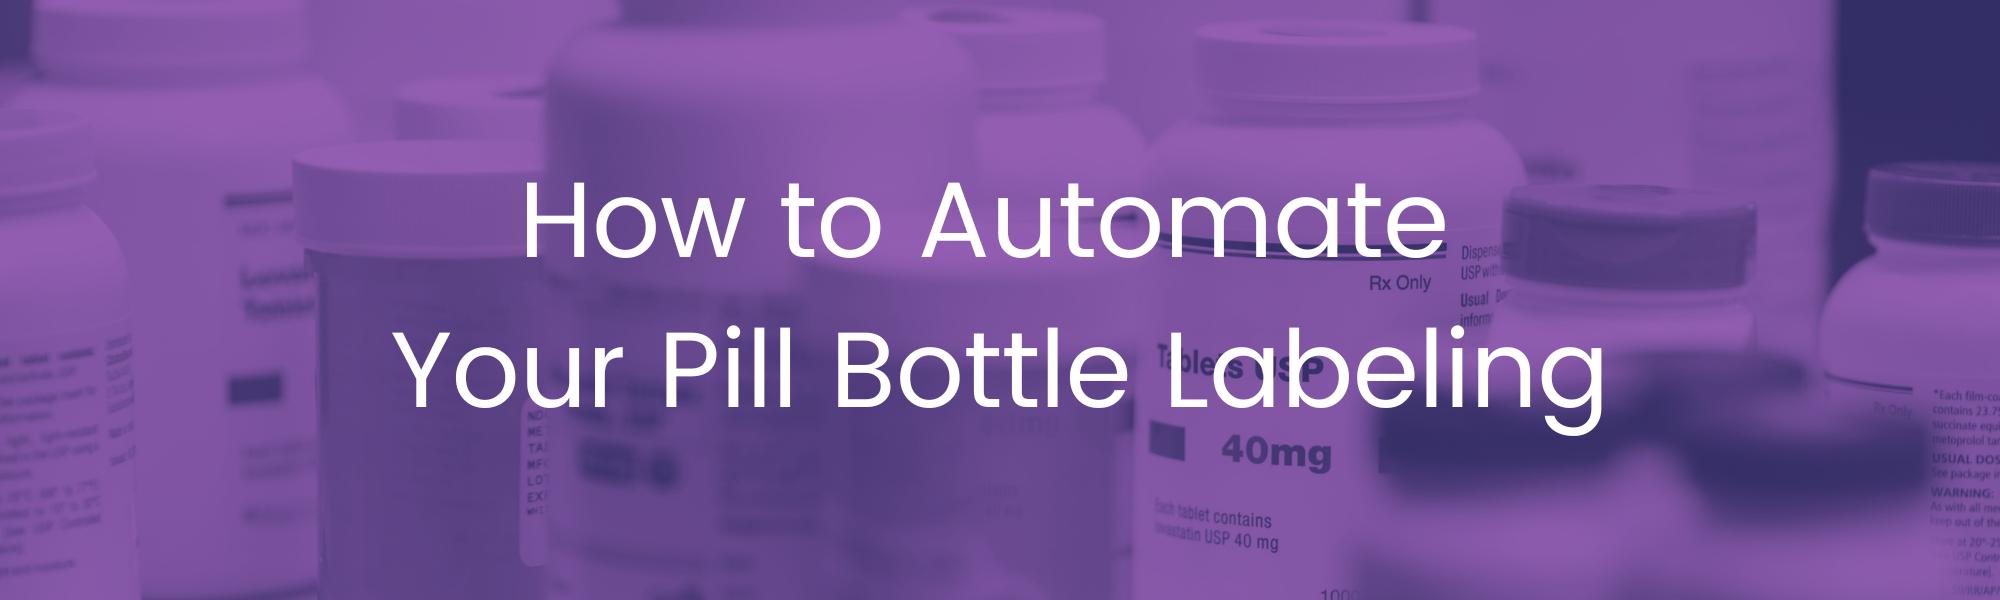 How to Automate Your Pill Bottle Labeling Header